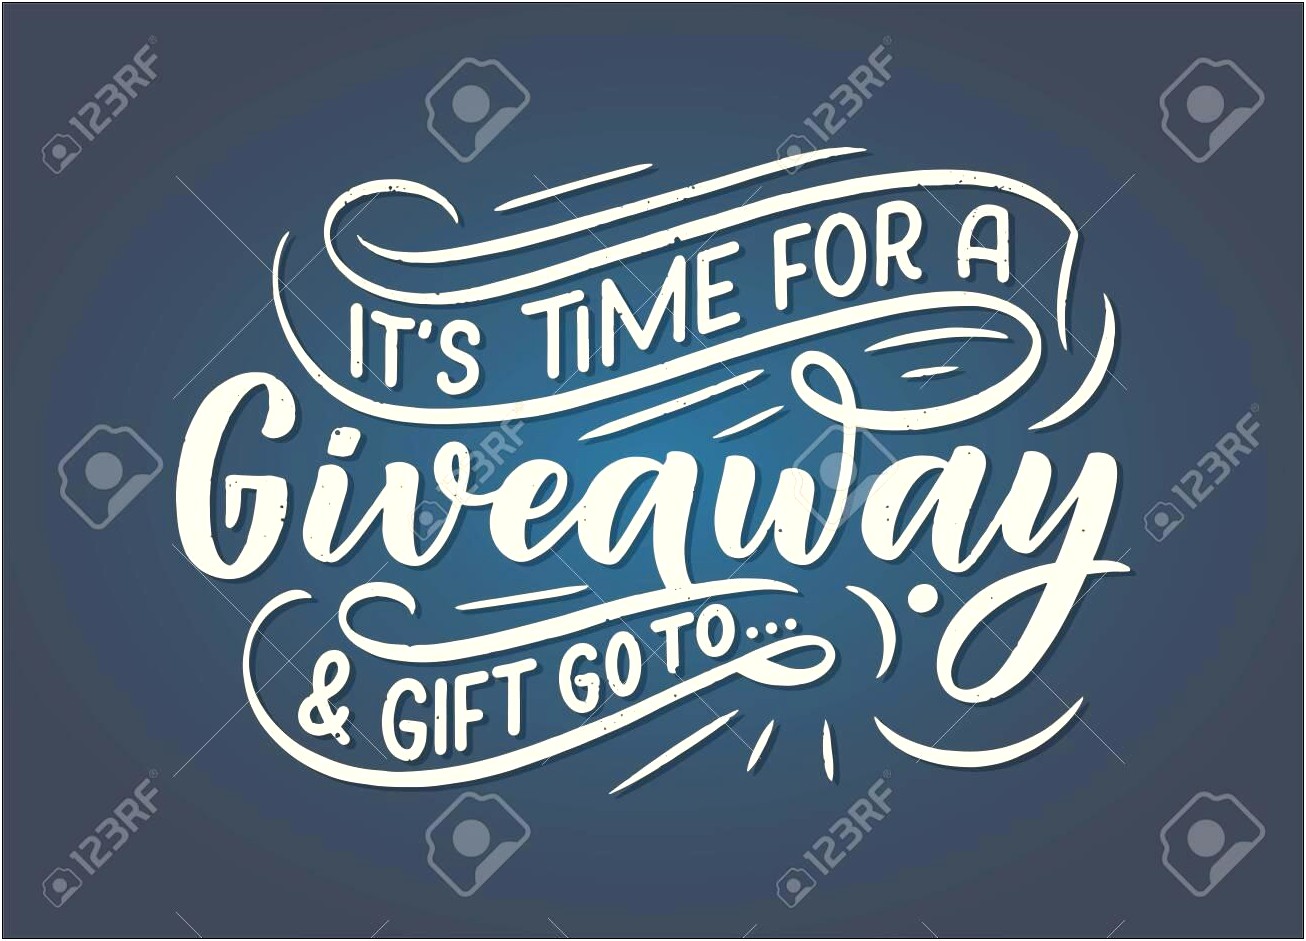 Gift Card Like A Share Giveaway Free Template